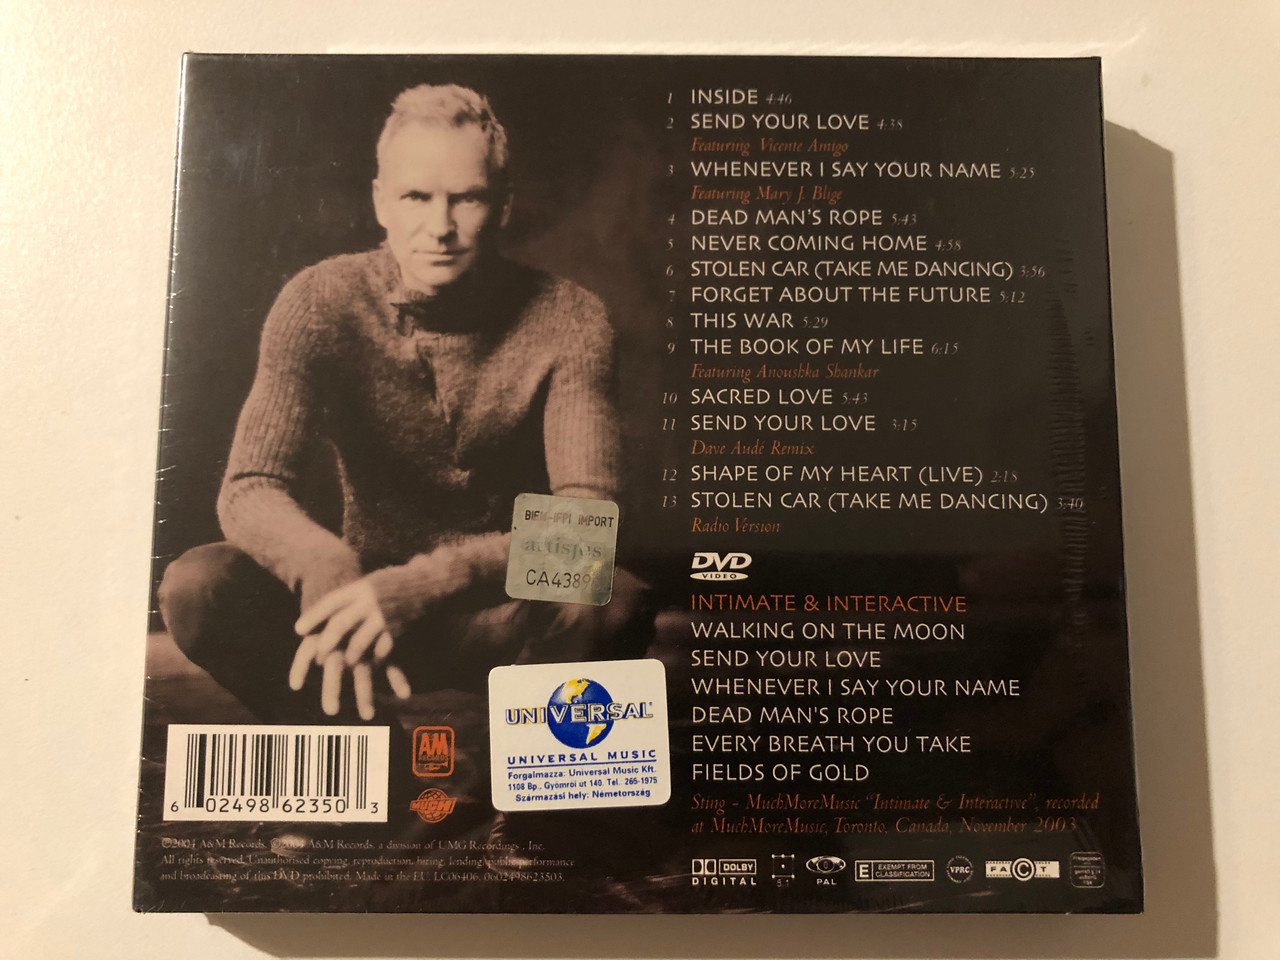 https://cdn10.bigcommerce.com/s-62bdpkt7pb/products/0/images/247046/Sting_Sacred_Love_Special_Limited_Tour_Edition_Includes_Bonus_DVD_With_6_Live_Songs_Album_Includes_Stolen_Car_Send_Your_Love_Insidee_and_Whenever_I_Say_Your_Name_AM_Records_Audio_CD__98204.1660032368.1280.1280.JPG?c=2&_gl=1*6sjn1t*_ga*MjA2NTIxMjE2MC4xNTkwNTEyNTMy*_ga_WS2VZYPC6G*MTY2MDAzMTM0My41MjEuMS4xNjYwMDMyMDk4LjQx